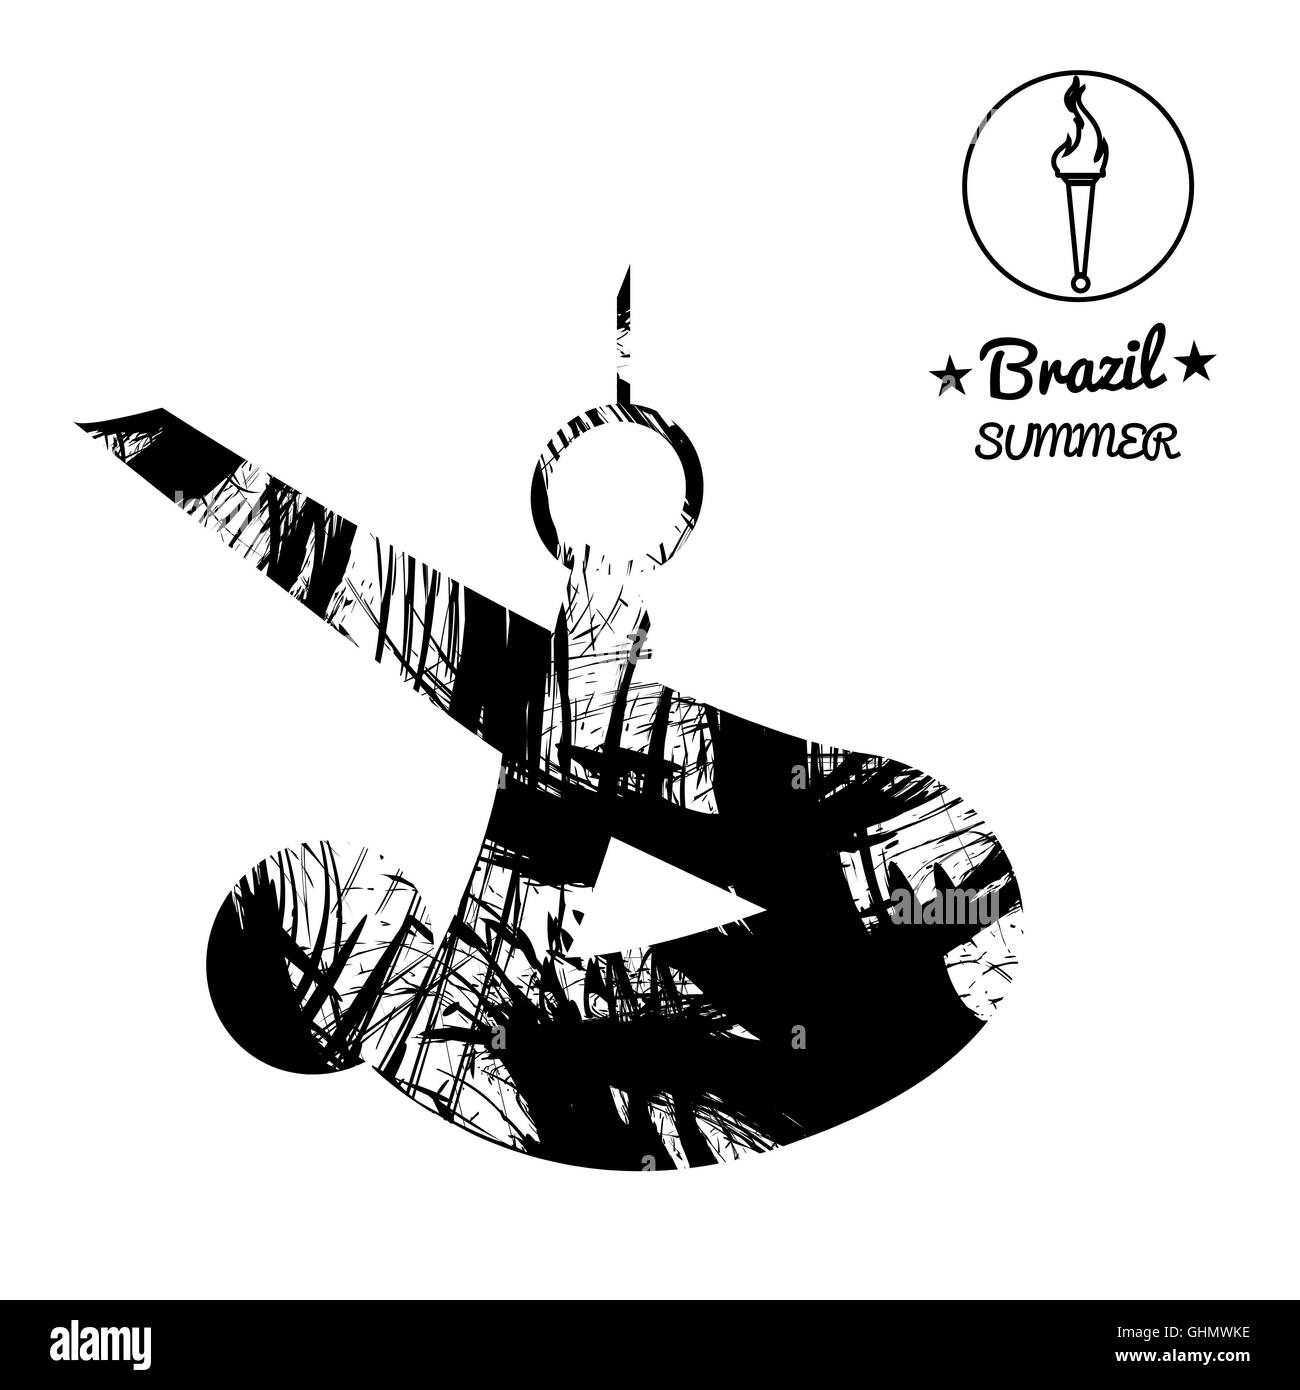 Brazil summer sport card with an abstract sportsman performing gymnastics on rings, in black outlines. Digital vector image Stock Photo